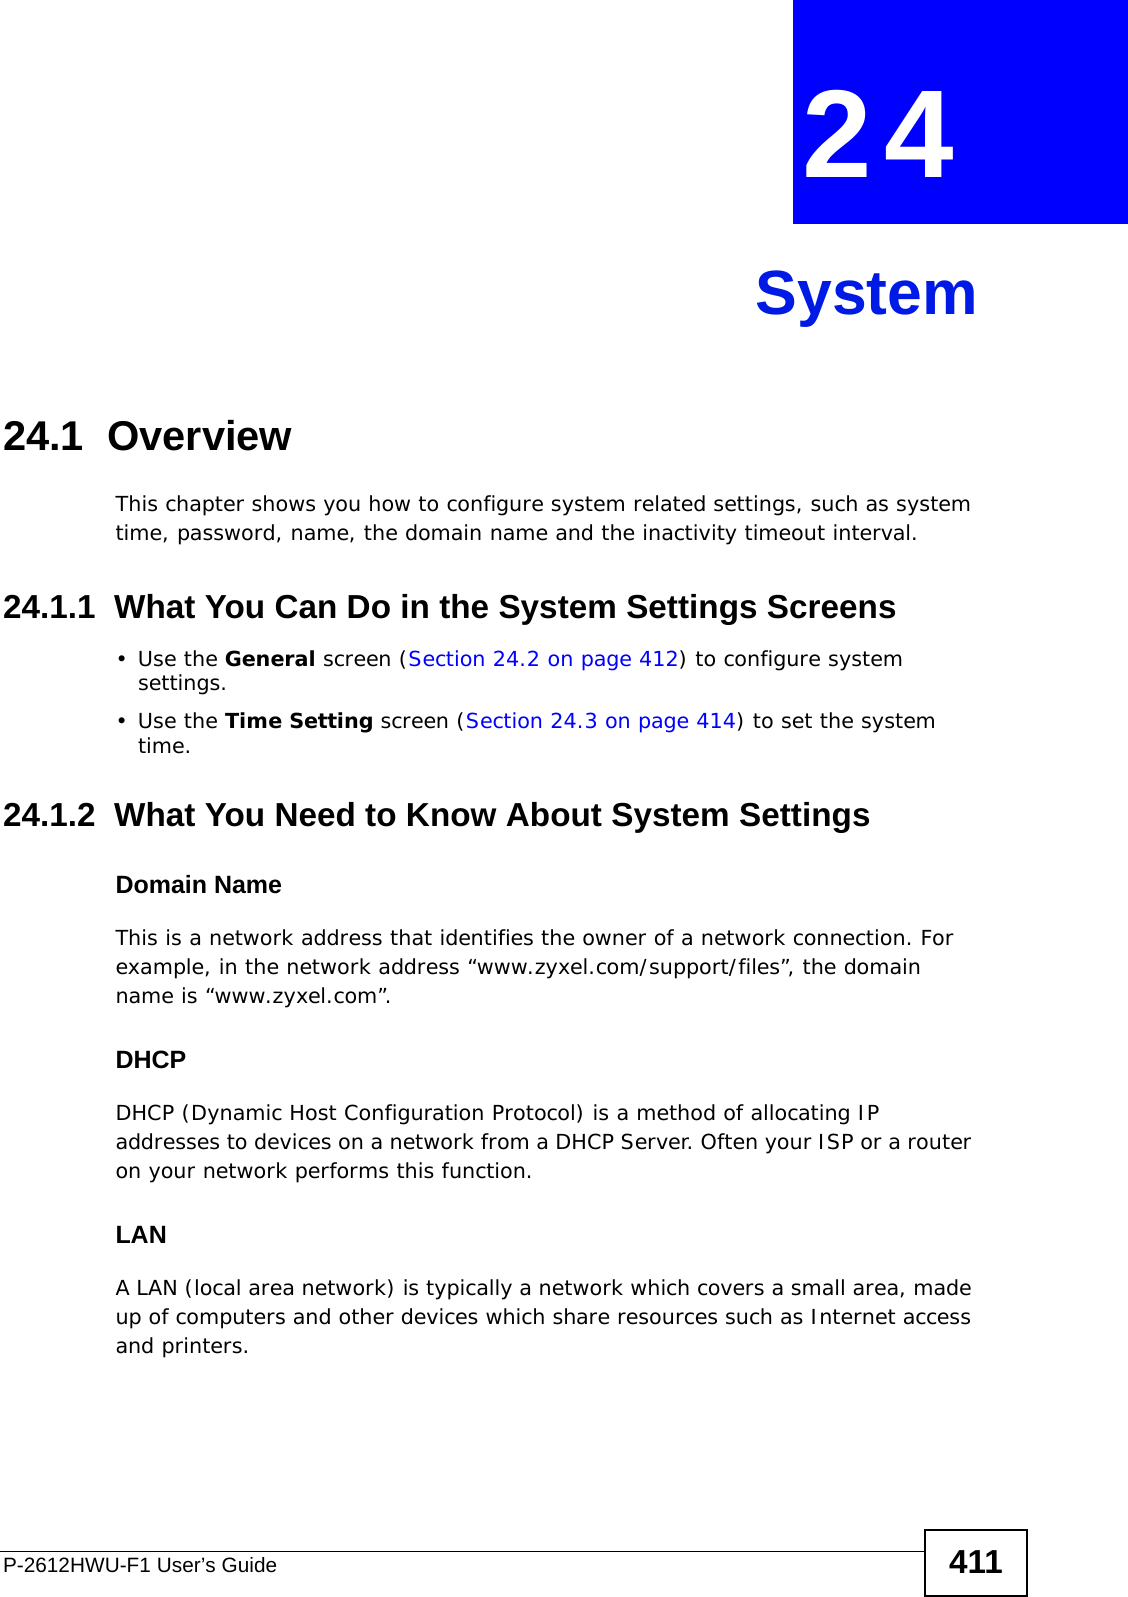 P-2612HWU-F1 User’s Guide 411CHAPTER  24 System24.1  Overview This chapter shows you how to configure system related settings, such as system time, password, name, the domain name and the inactivity timeout interval.    24.1.1  What You Can Do in the System Settings Screens•Use the General screen (Section 24.2 on page 412) to configure system settings.•Use the Time Setting screen (Section 24.3 on page 414) to set the system time.24.1.2  What You Need to Know About System SettingsDomain NameThis is a network address that identifies the owner of a network connection. For example, in the network address “www.zyxel.com/support/files”, the domain name is “www.zyxel.com”. DHCPDHCP (Dynamic Host Configuration Protocol) is a method of allocating IP addresses to devices on a network from a DHCP Server. Often your ISP or a router on your network performs this function.LANA LAN (local area network) is typically a network which covers a small area, made up of computers and other devices which share resources such as Internet access and printers.